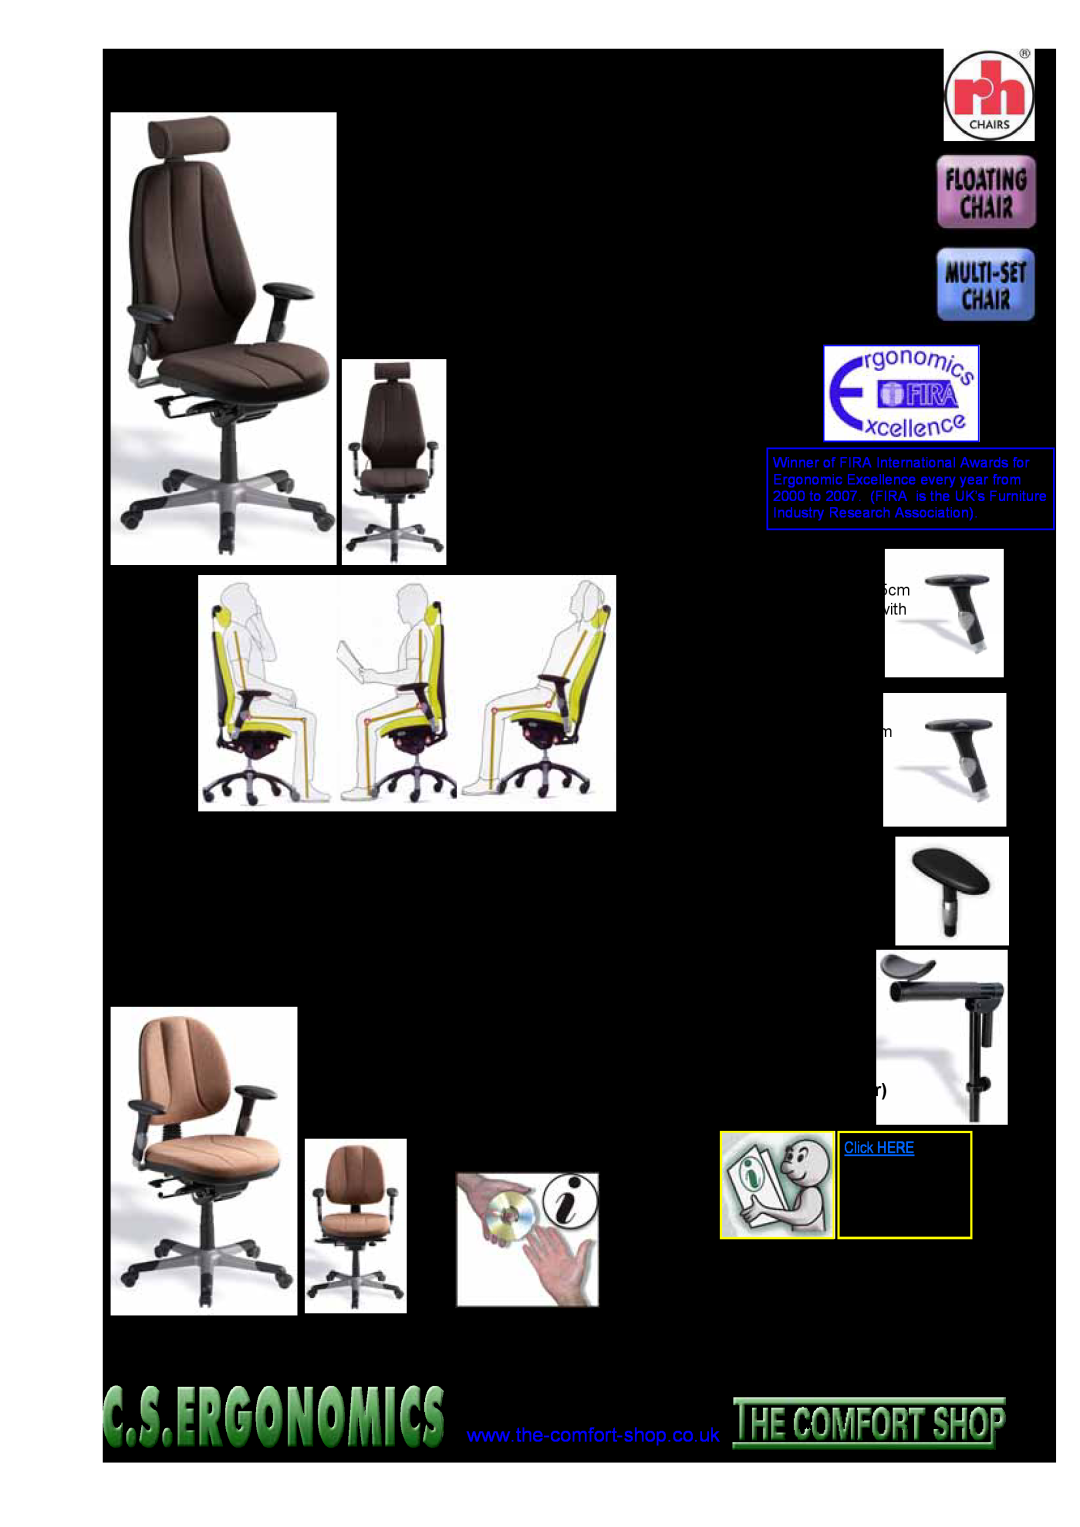 Fellowes RH 300 RH Logic 4 and RH Logic 3 chairs, Swivel-toparms, Relax 3-Dfloating armrests, £72 + VAT £84.60 pair, 01253 